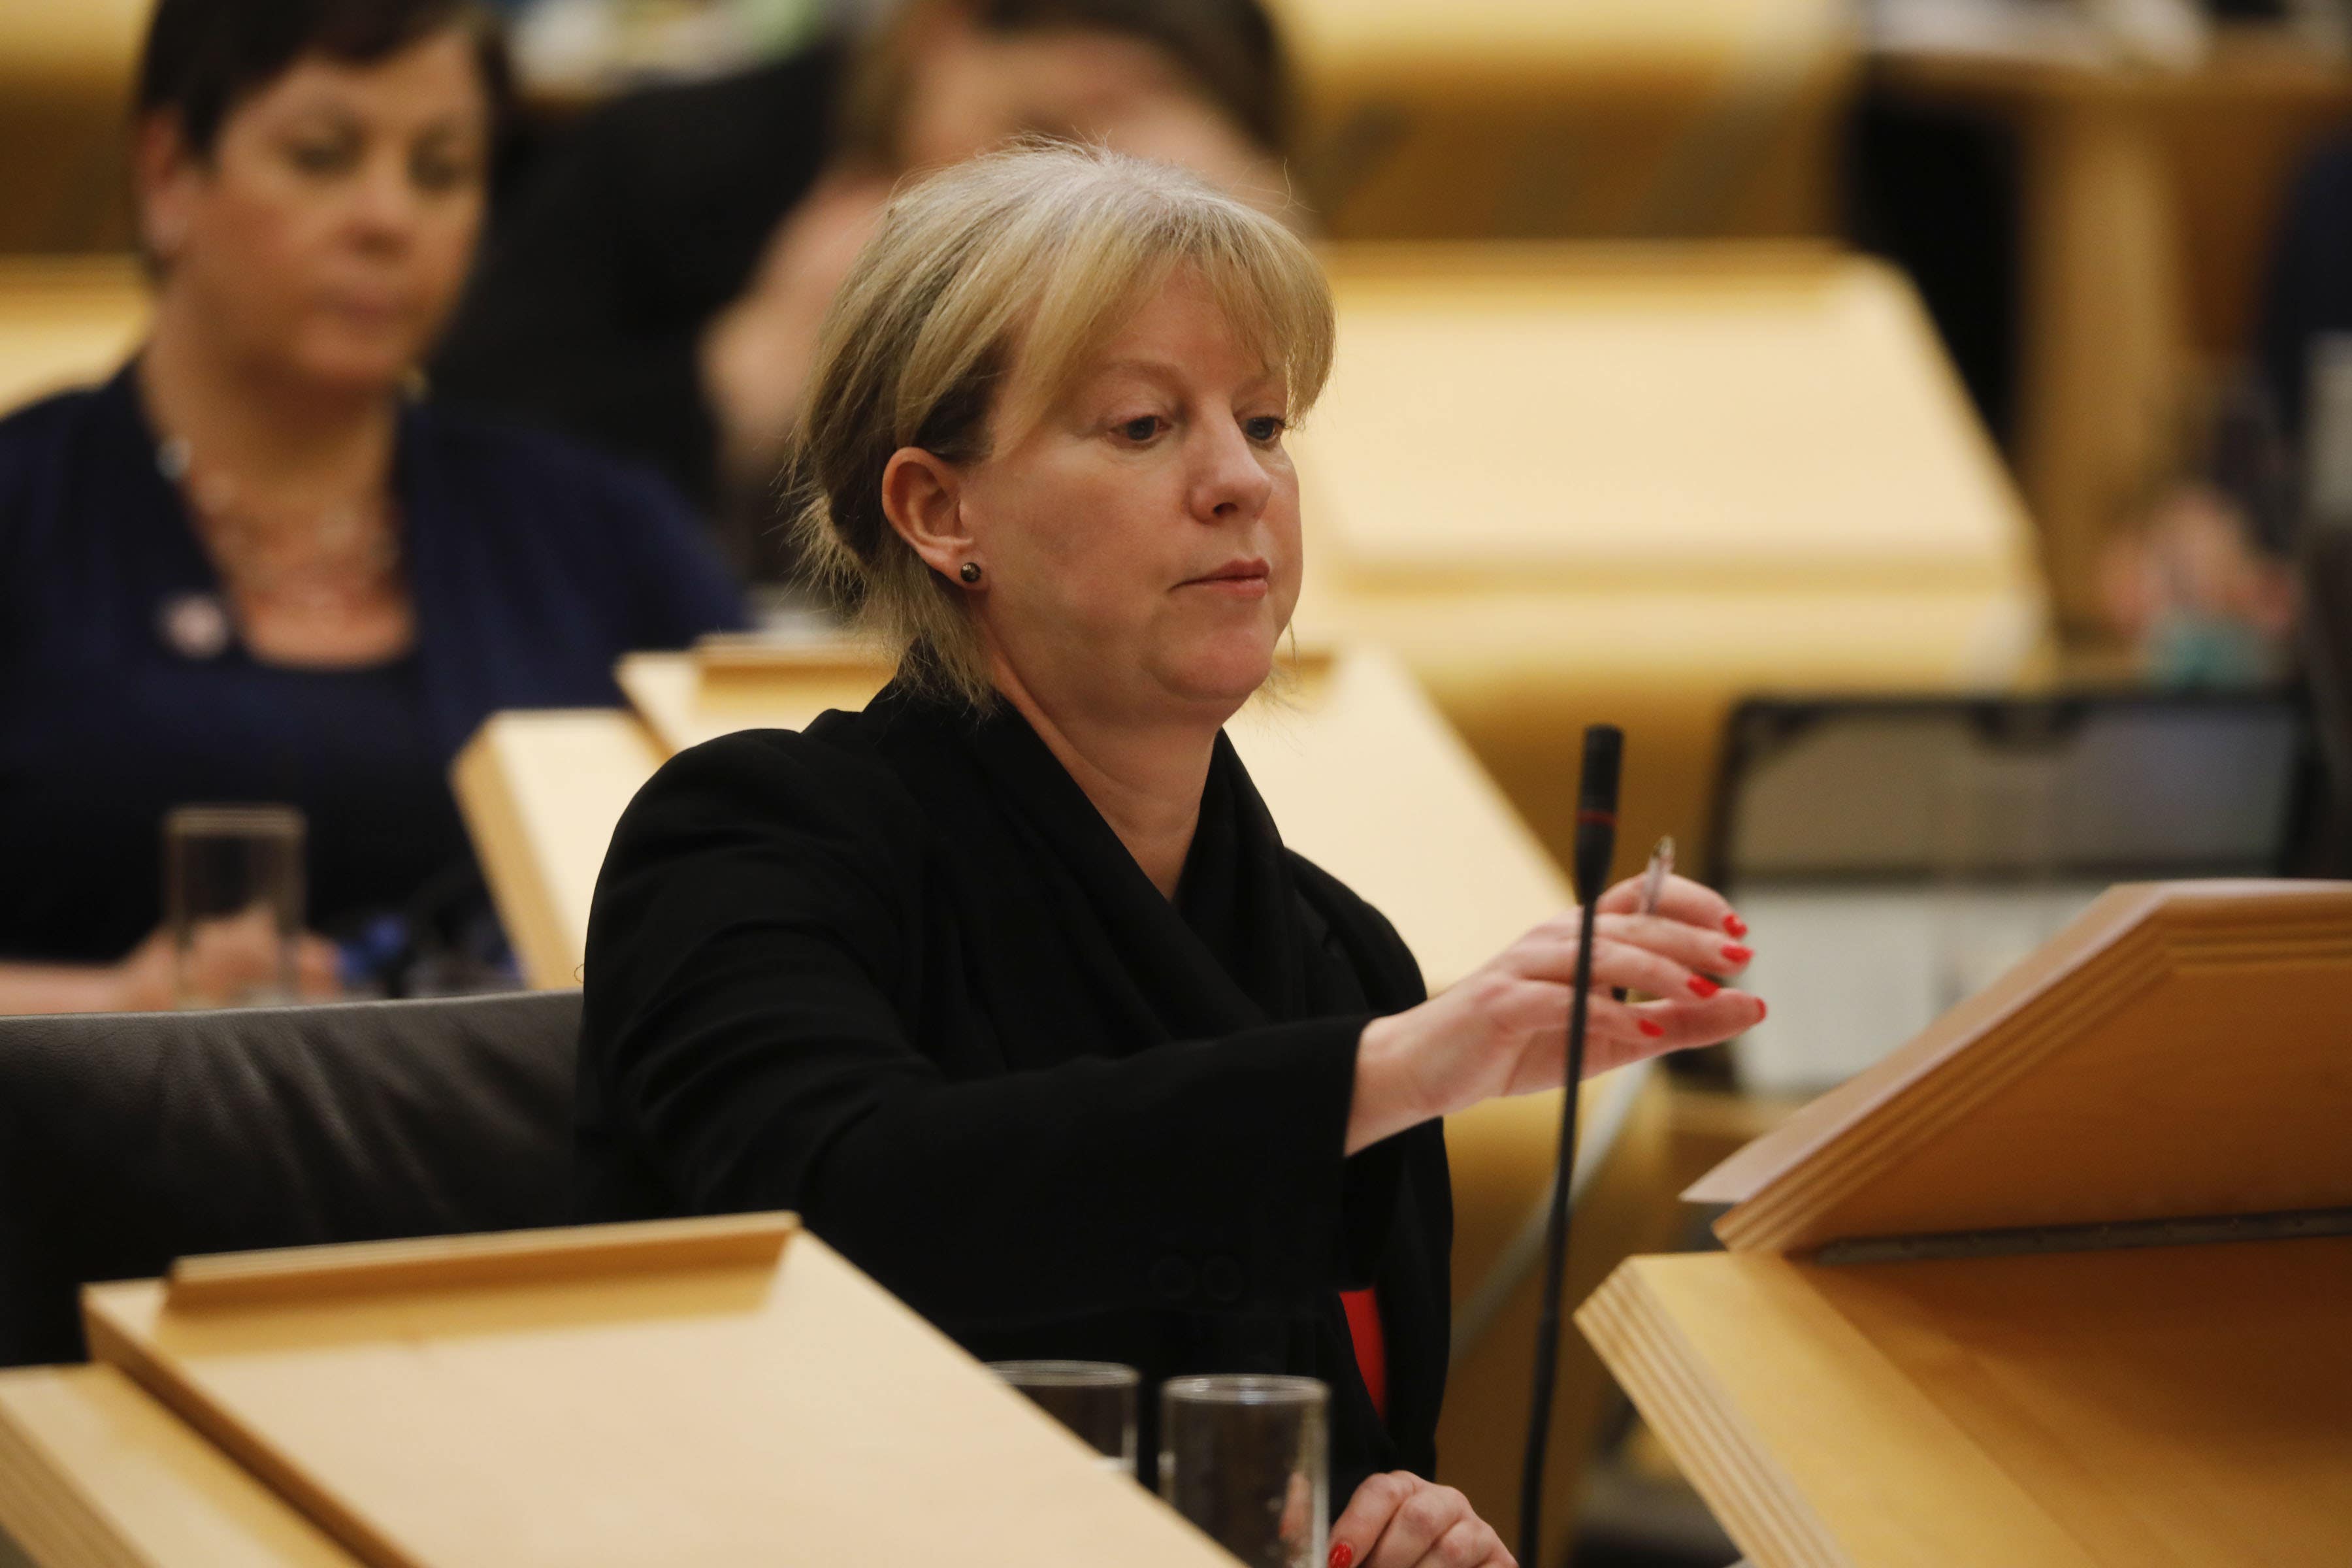 The Social Justice Secretary said the Bill would be defended (Andrew Cowan/Scottish Parliament/PA)